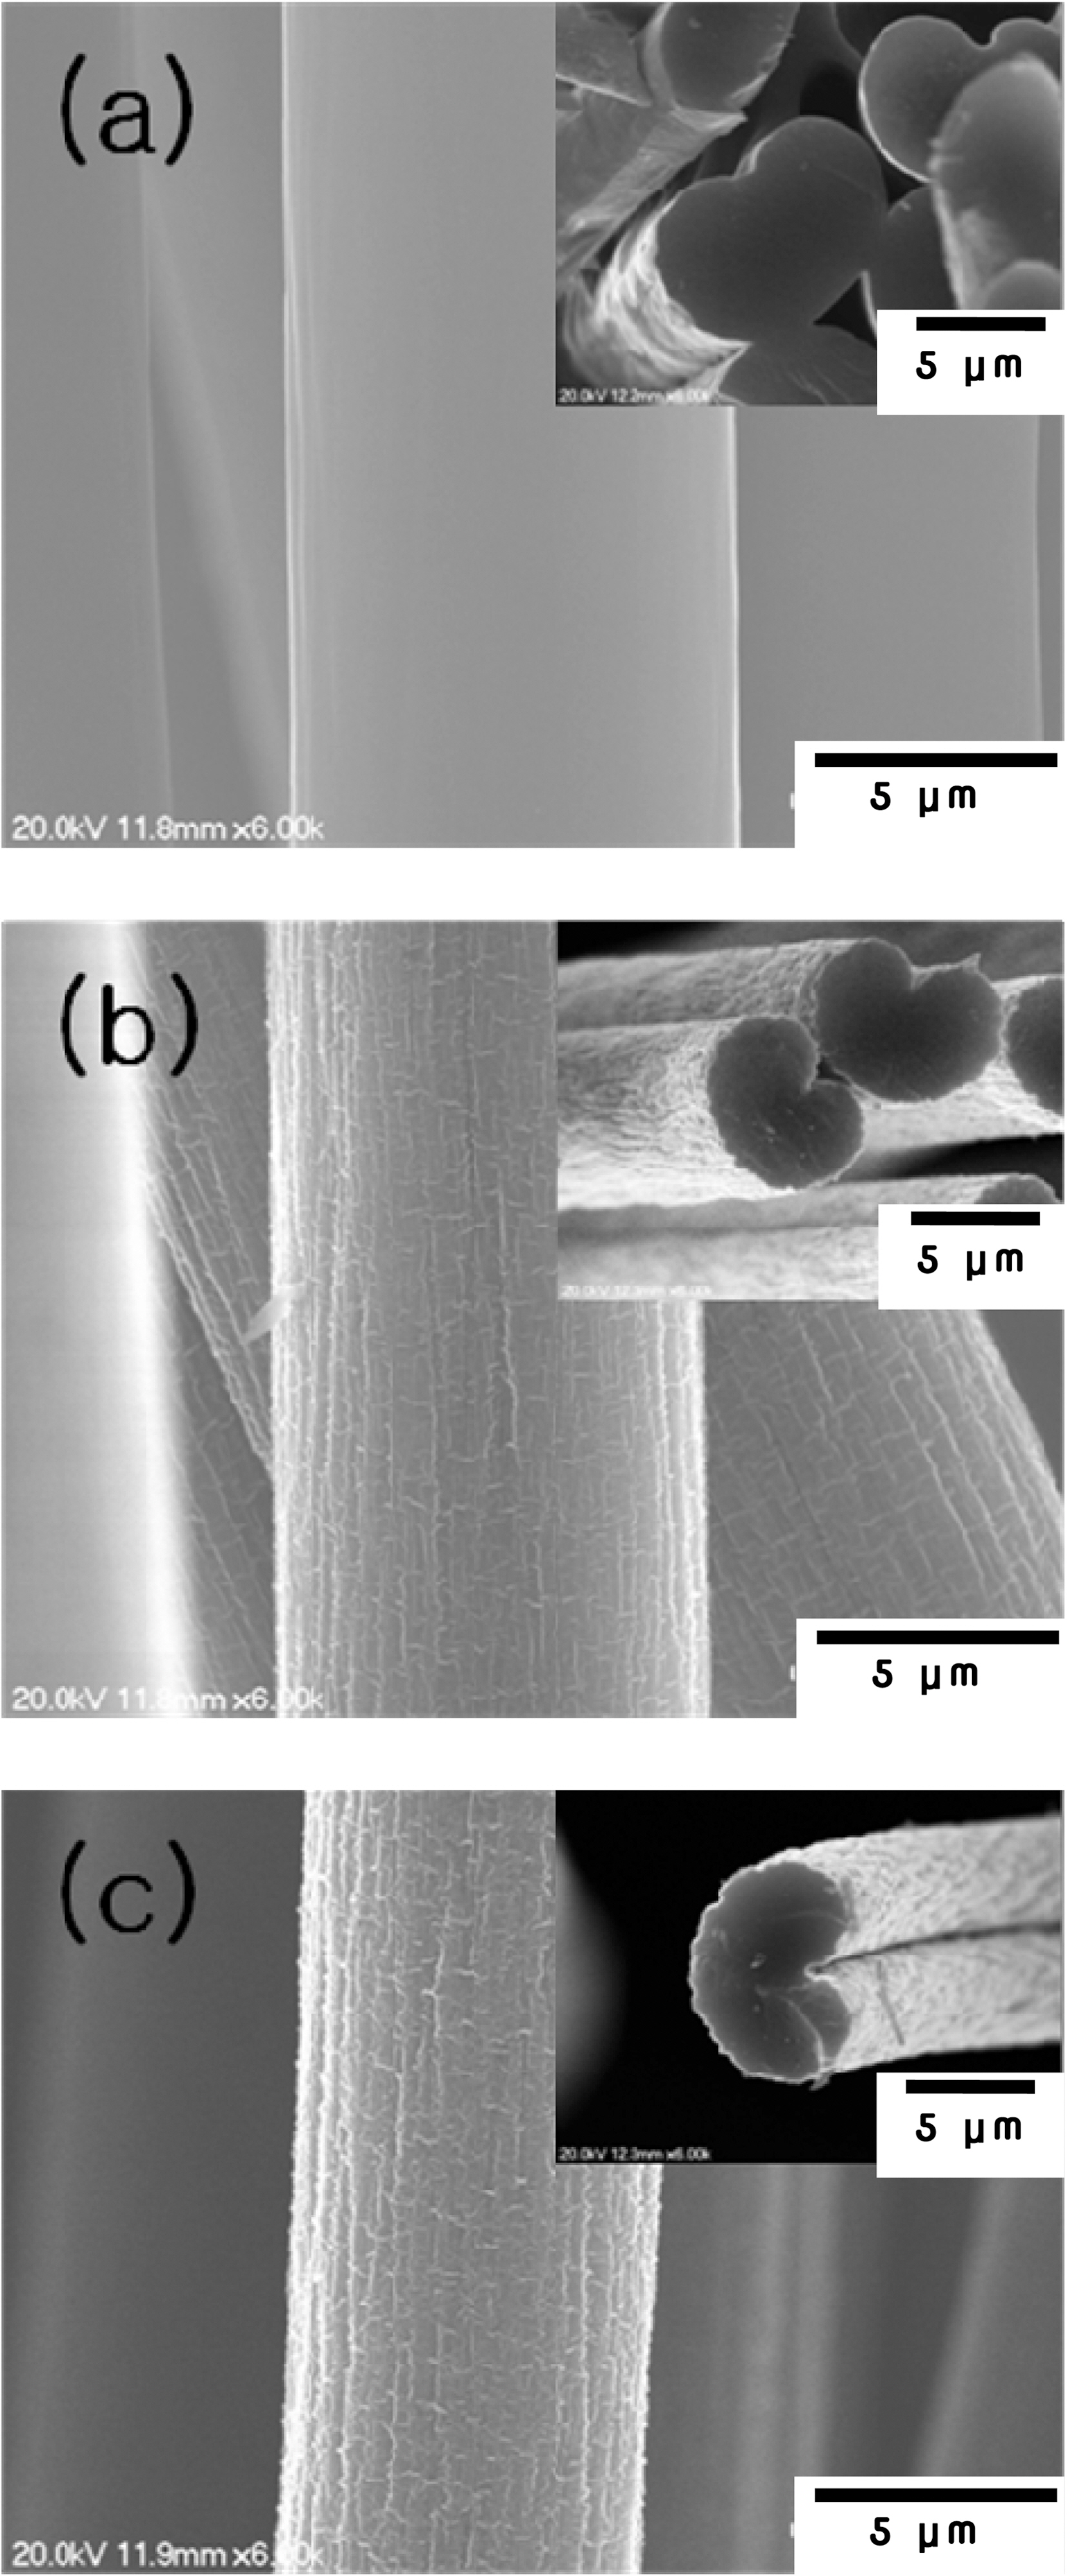 Scanning microscope images of carbon fibers with (a)thermal treatment at 220oC for 30 min and additional plasmatreatment for (b) 5 min and (c) 15 min. The inset images are forcross-section of the fibers.